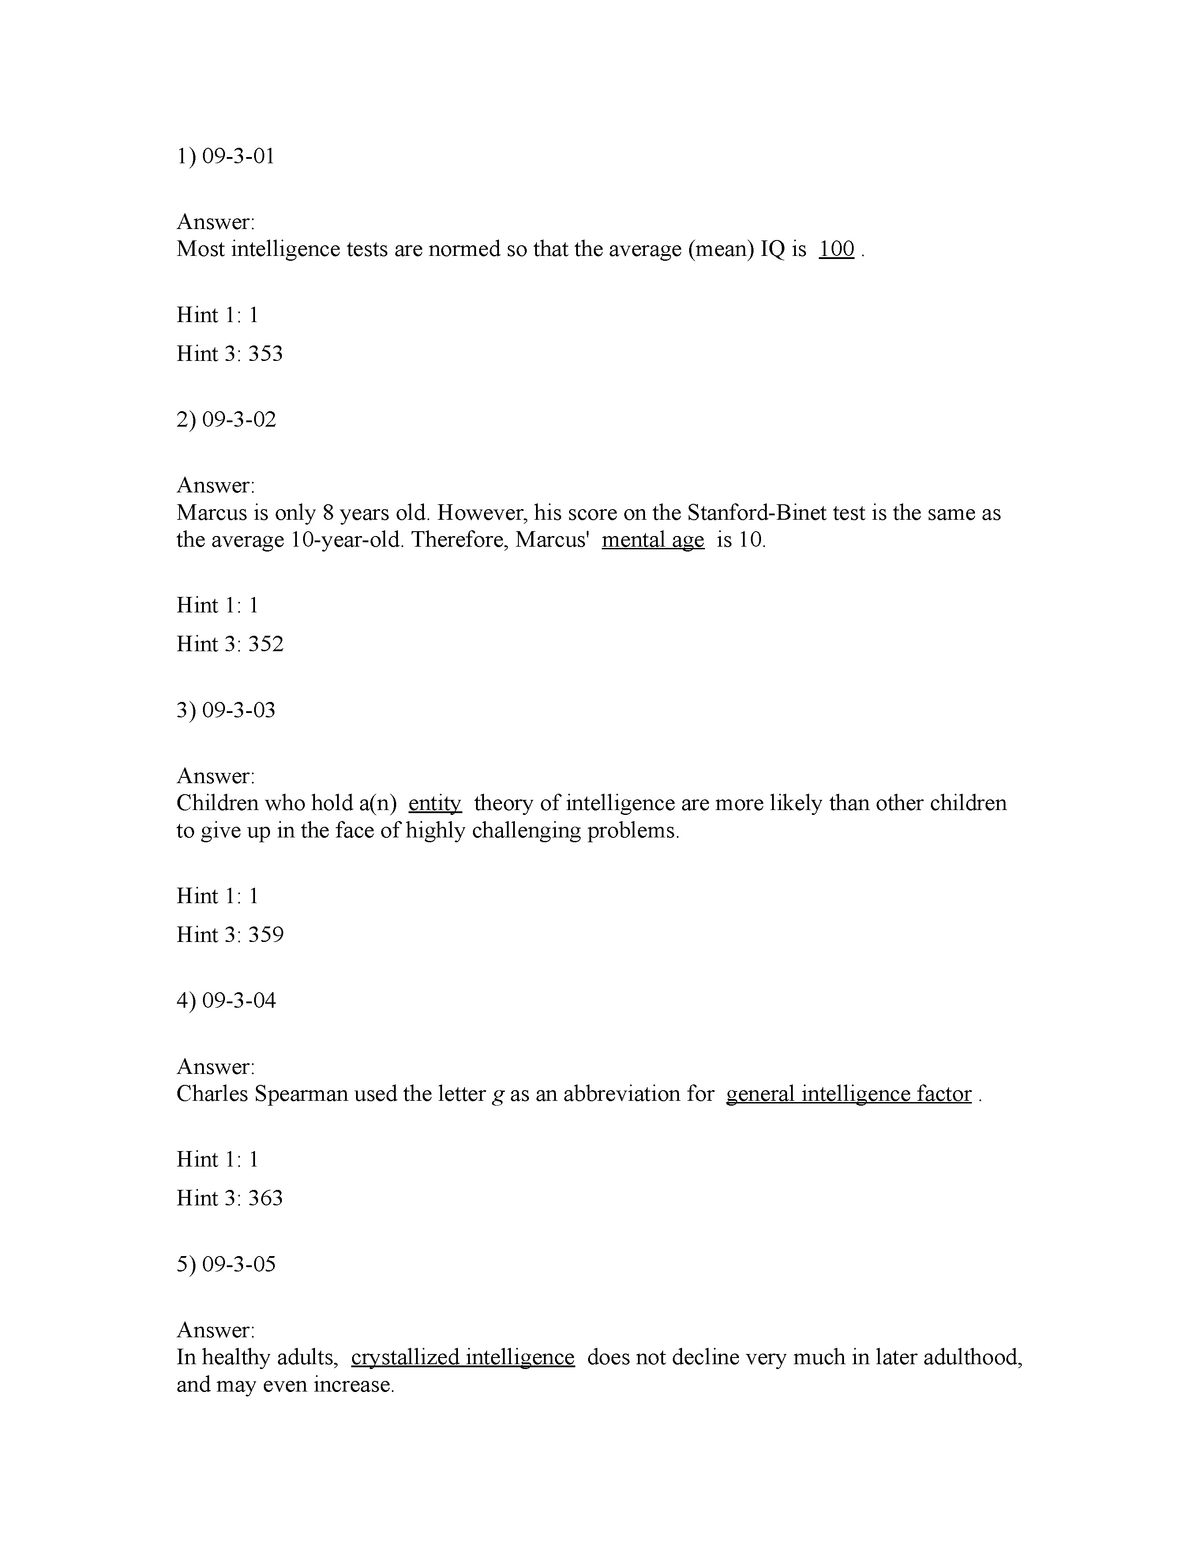 chapter-09-fill-in-the-blank-questions-tif-1-09-3-answer-most